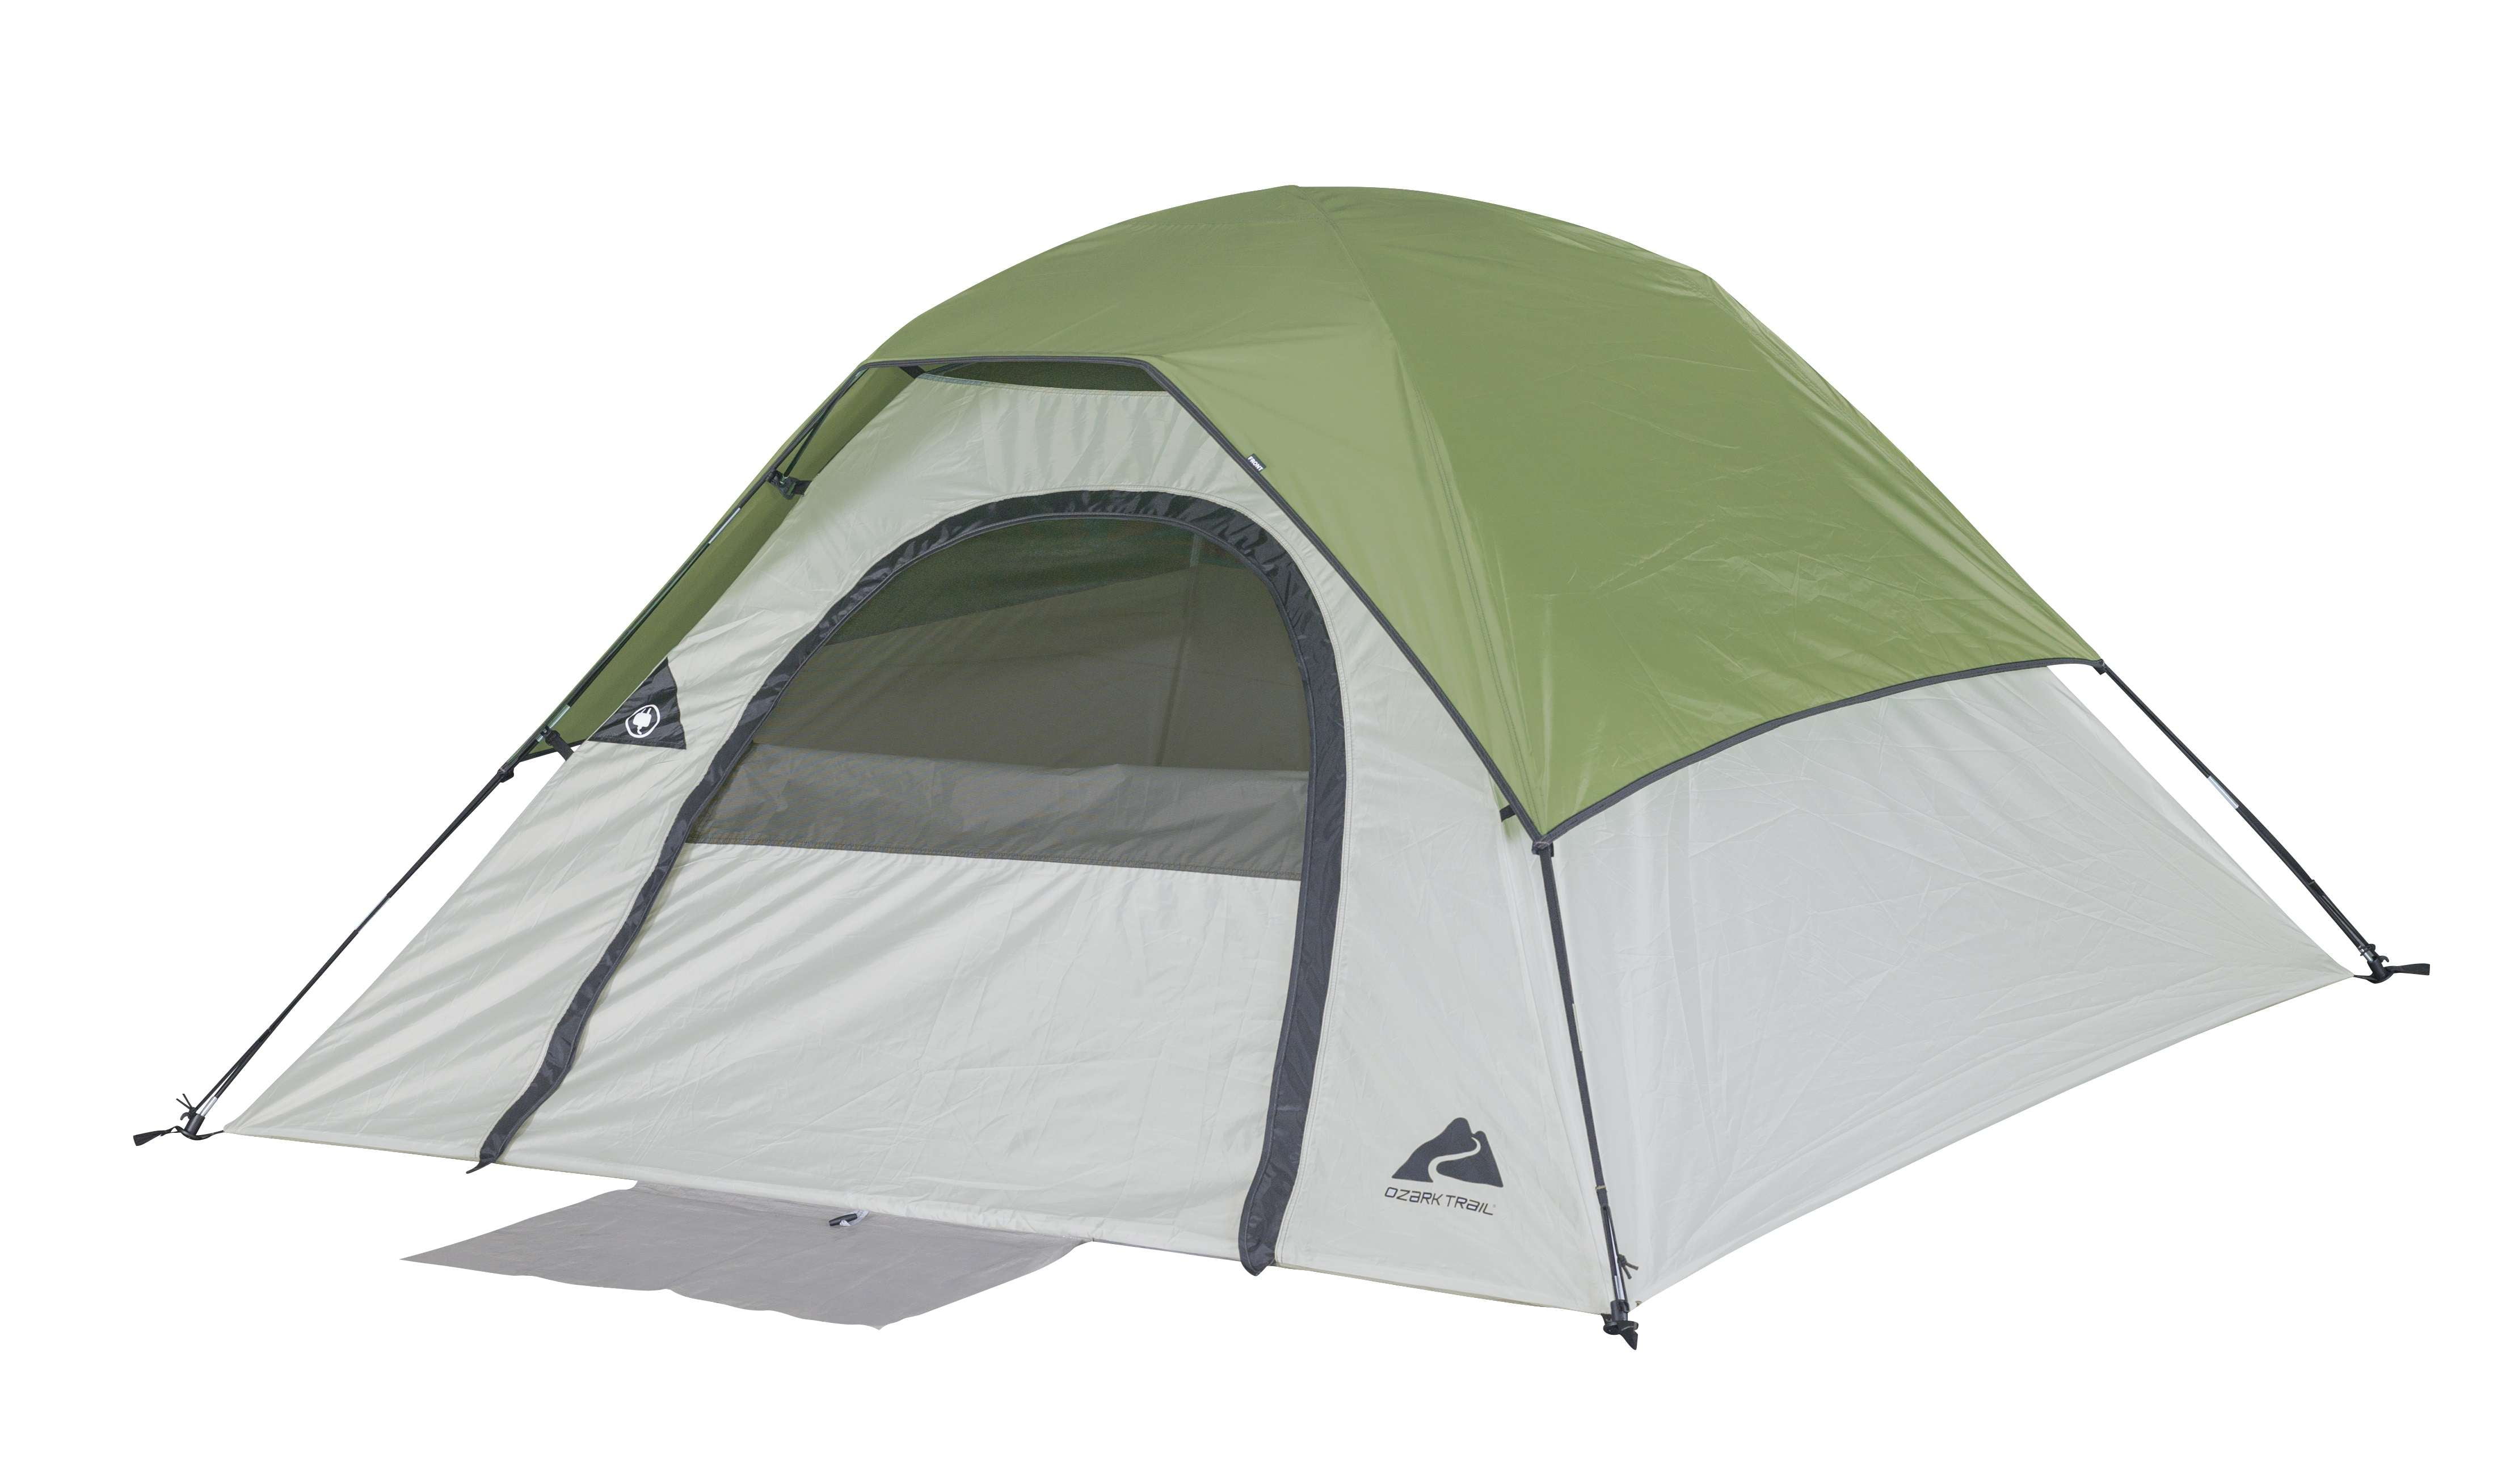 New Ozark Trail 4 Person Camping Outdoor Family Outings Picnic Hiking Dome Tent 